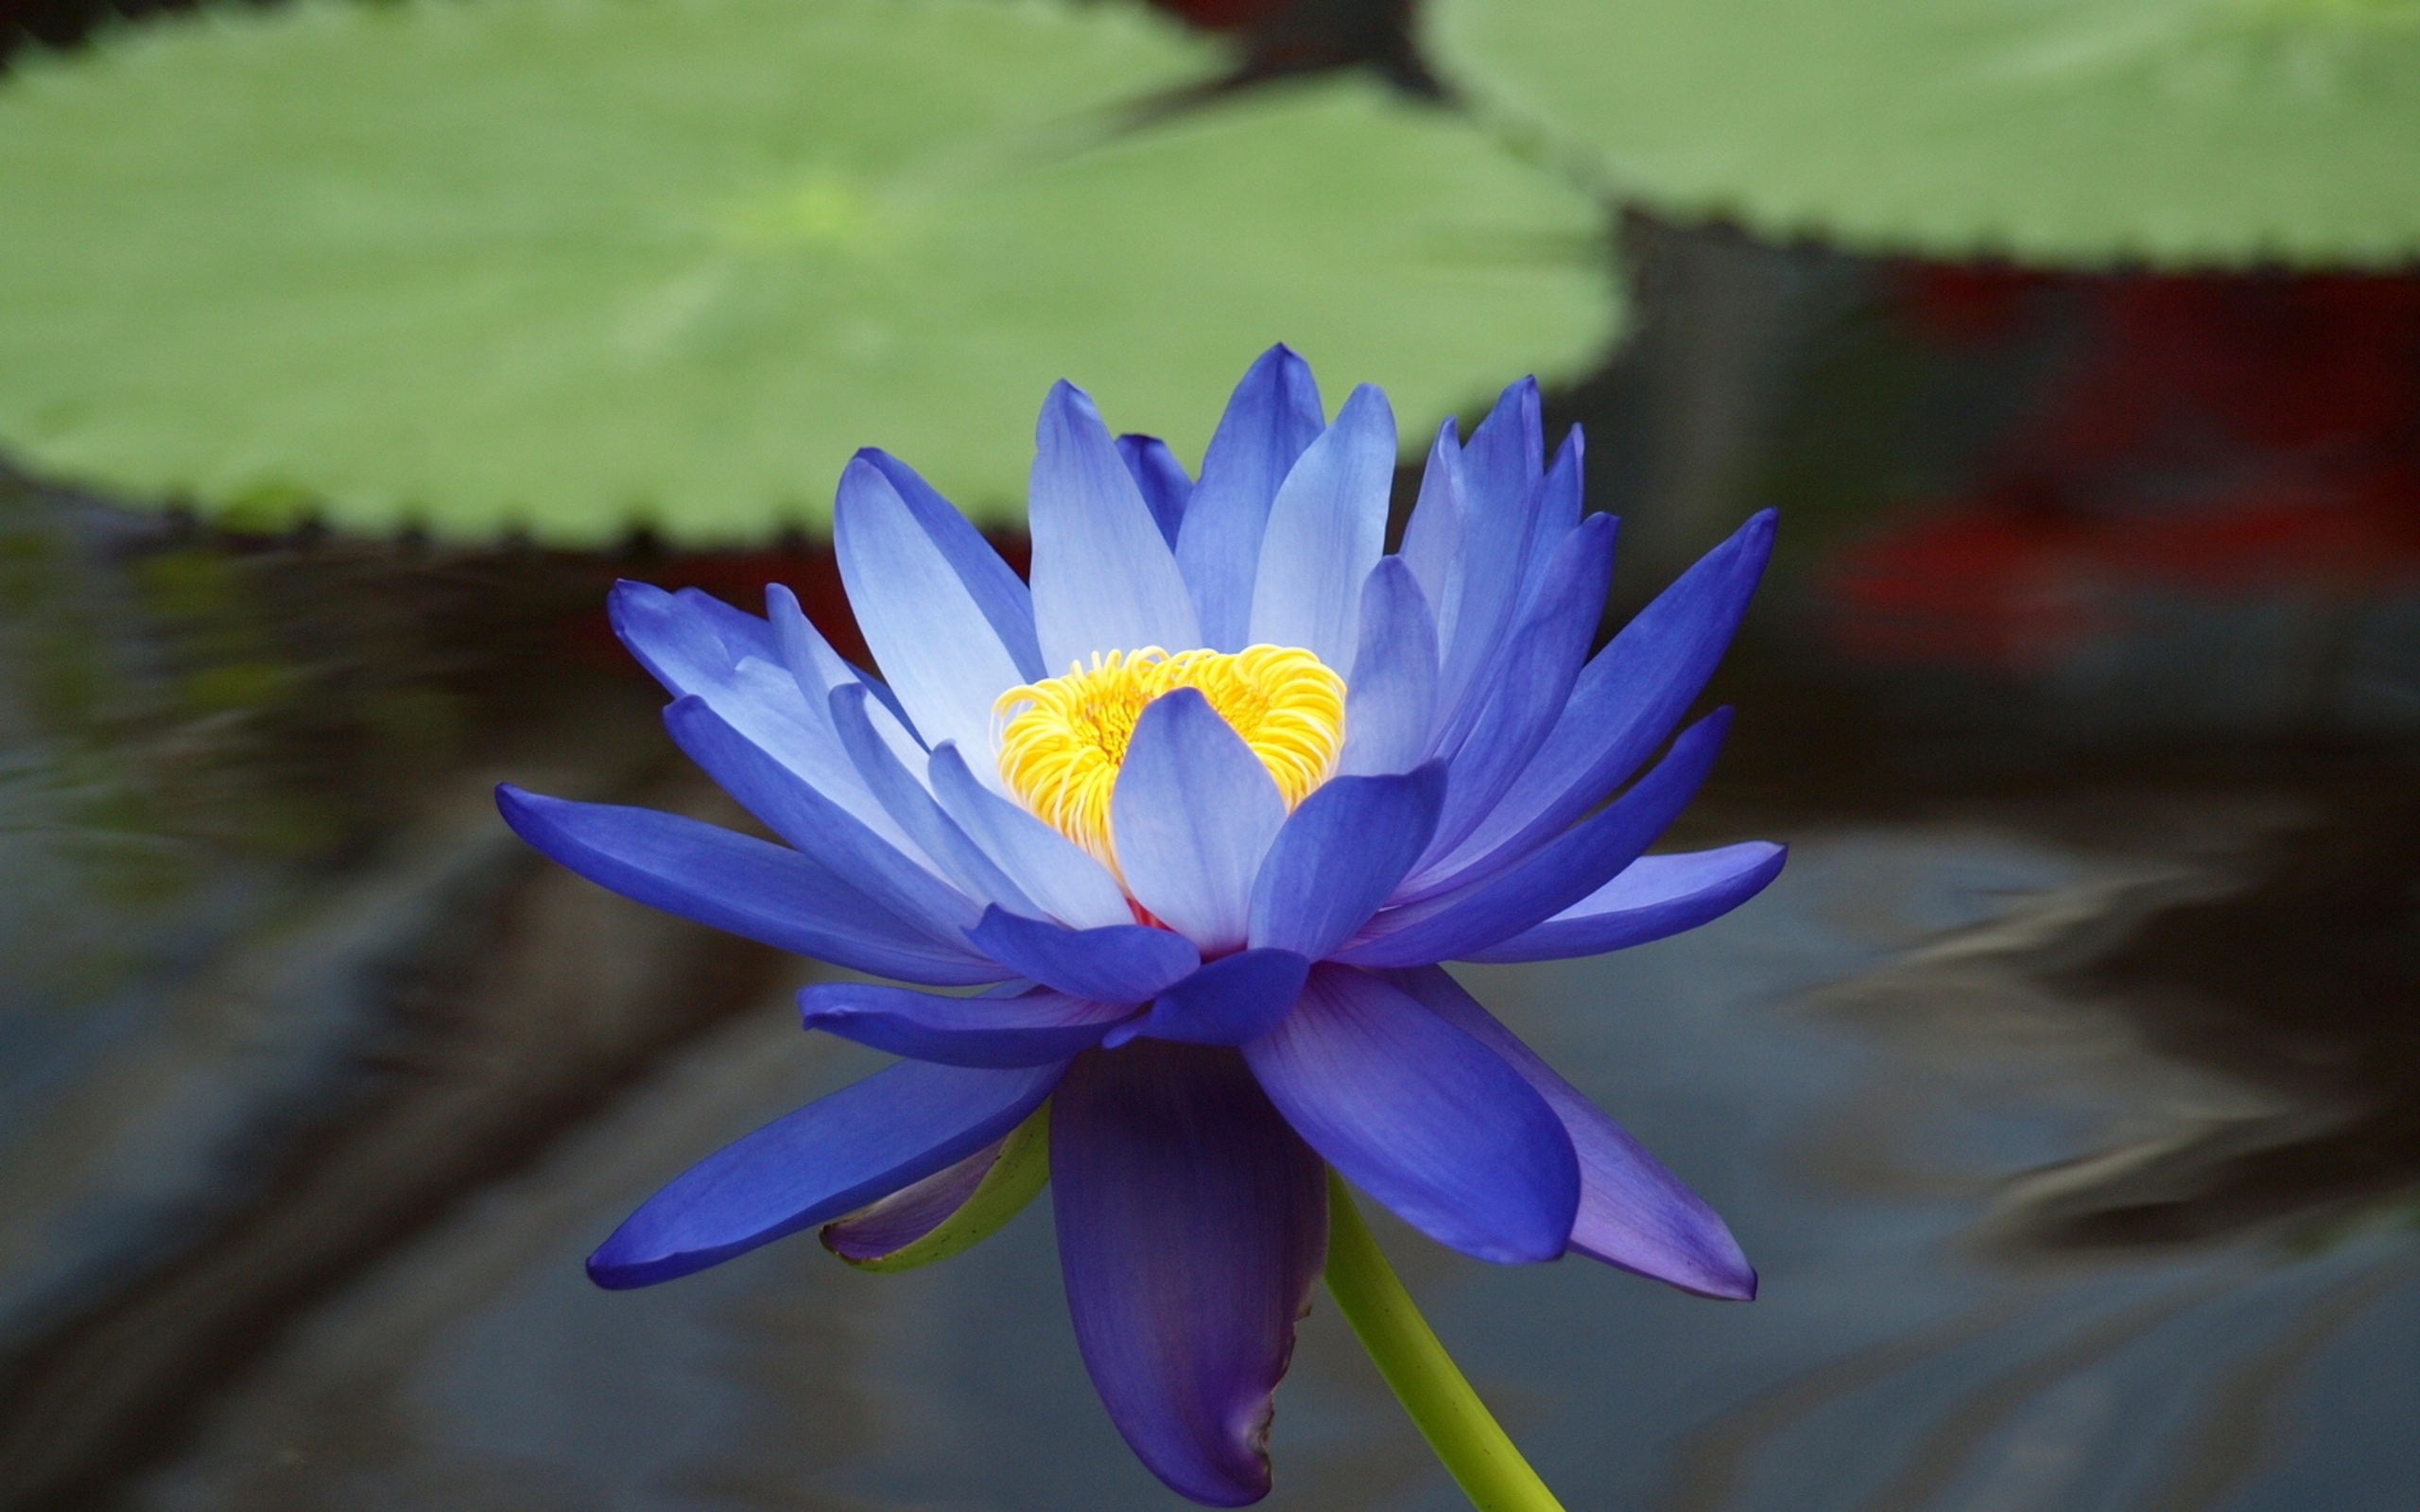 earth, water lily, flower wallpaper for mobile